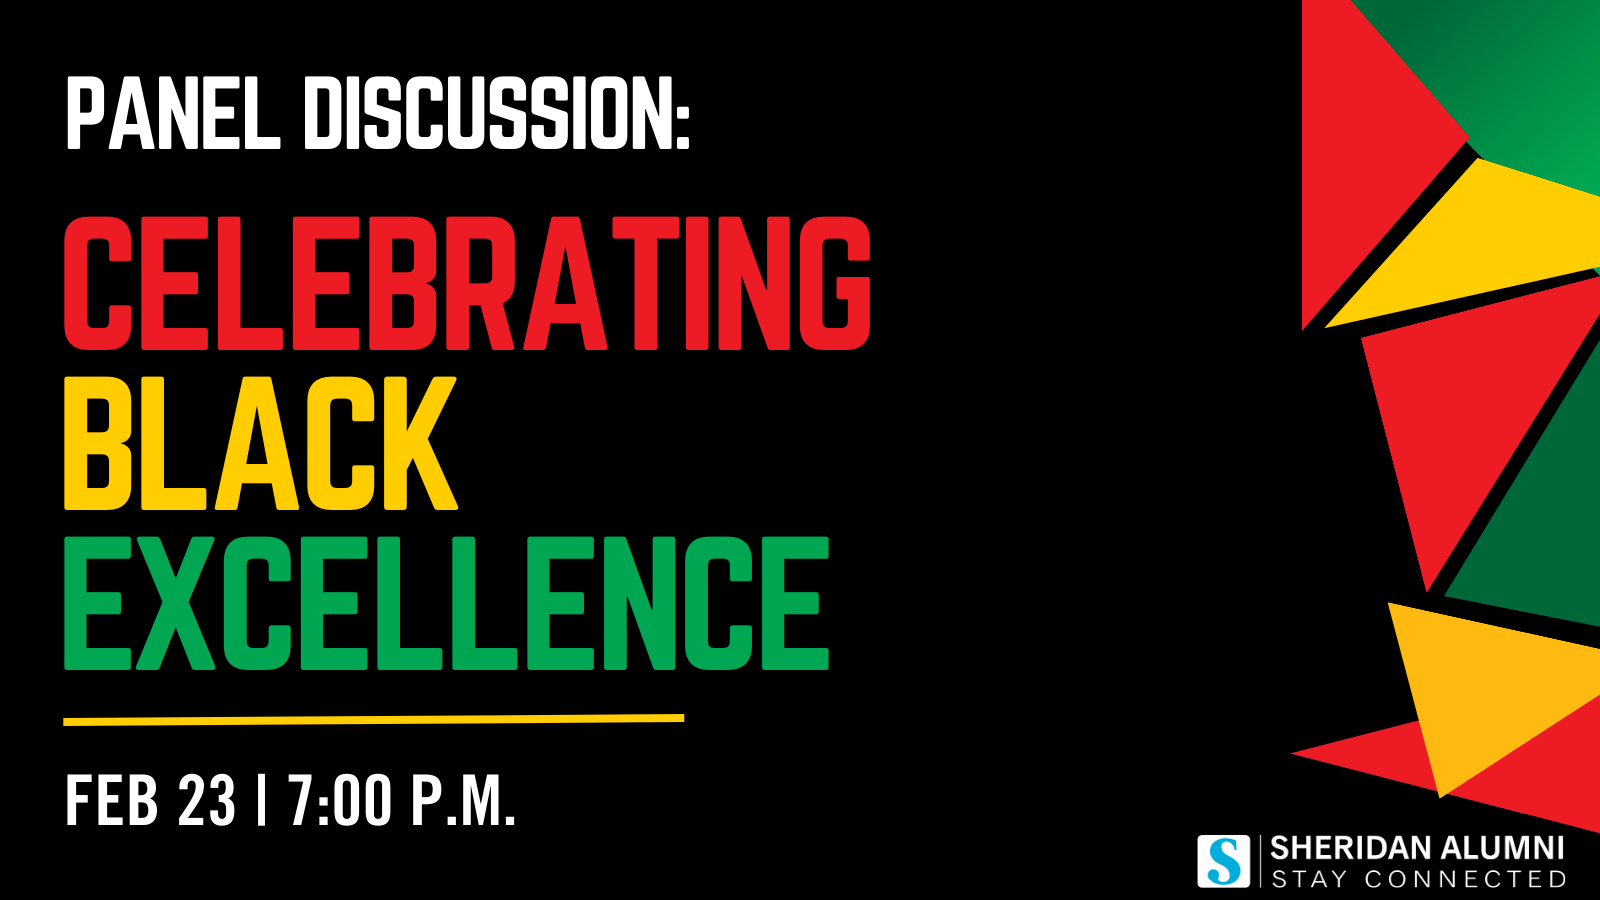 Panel Discussion: Celebrating Black Excellence | Feb 23 | 7:00 P.M. | Sheridan Alumni | Stay Connected